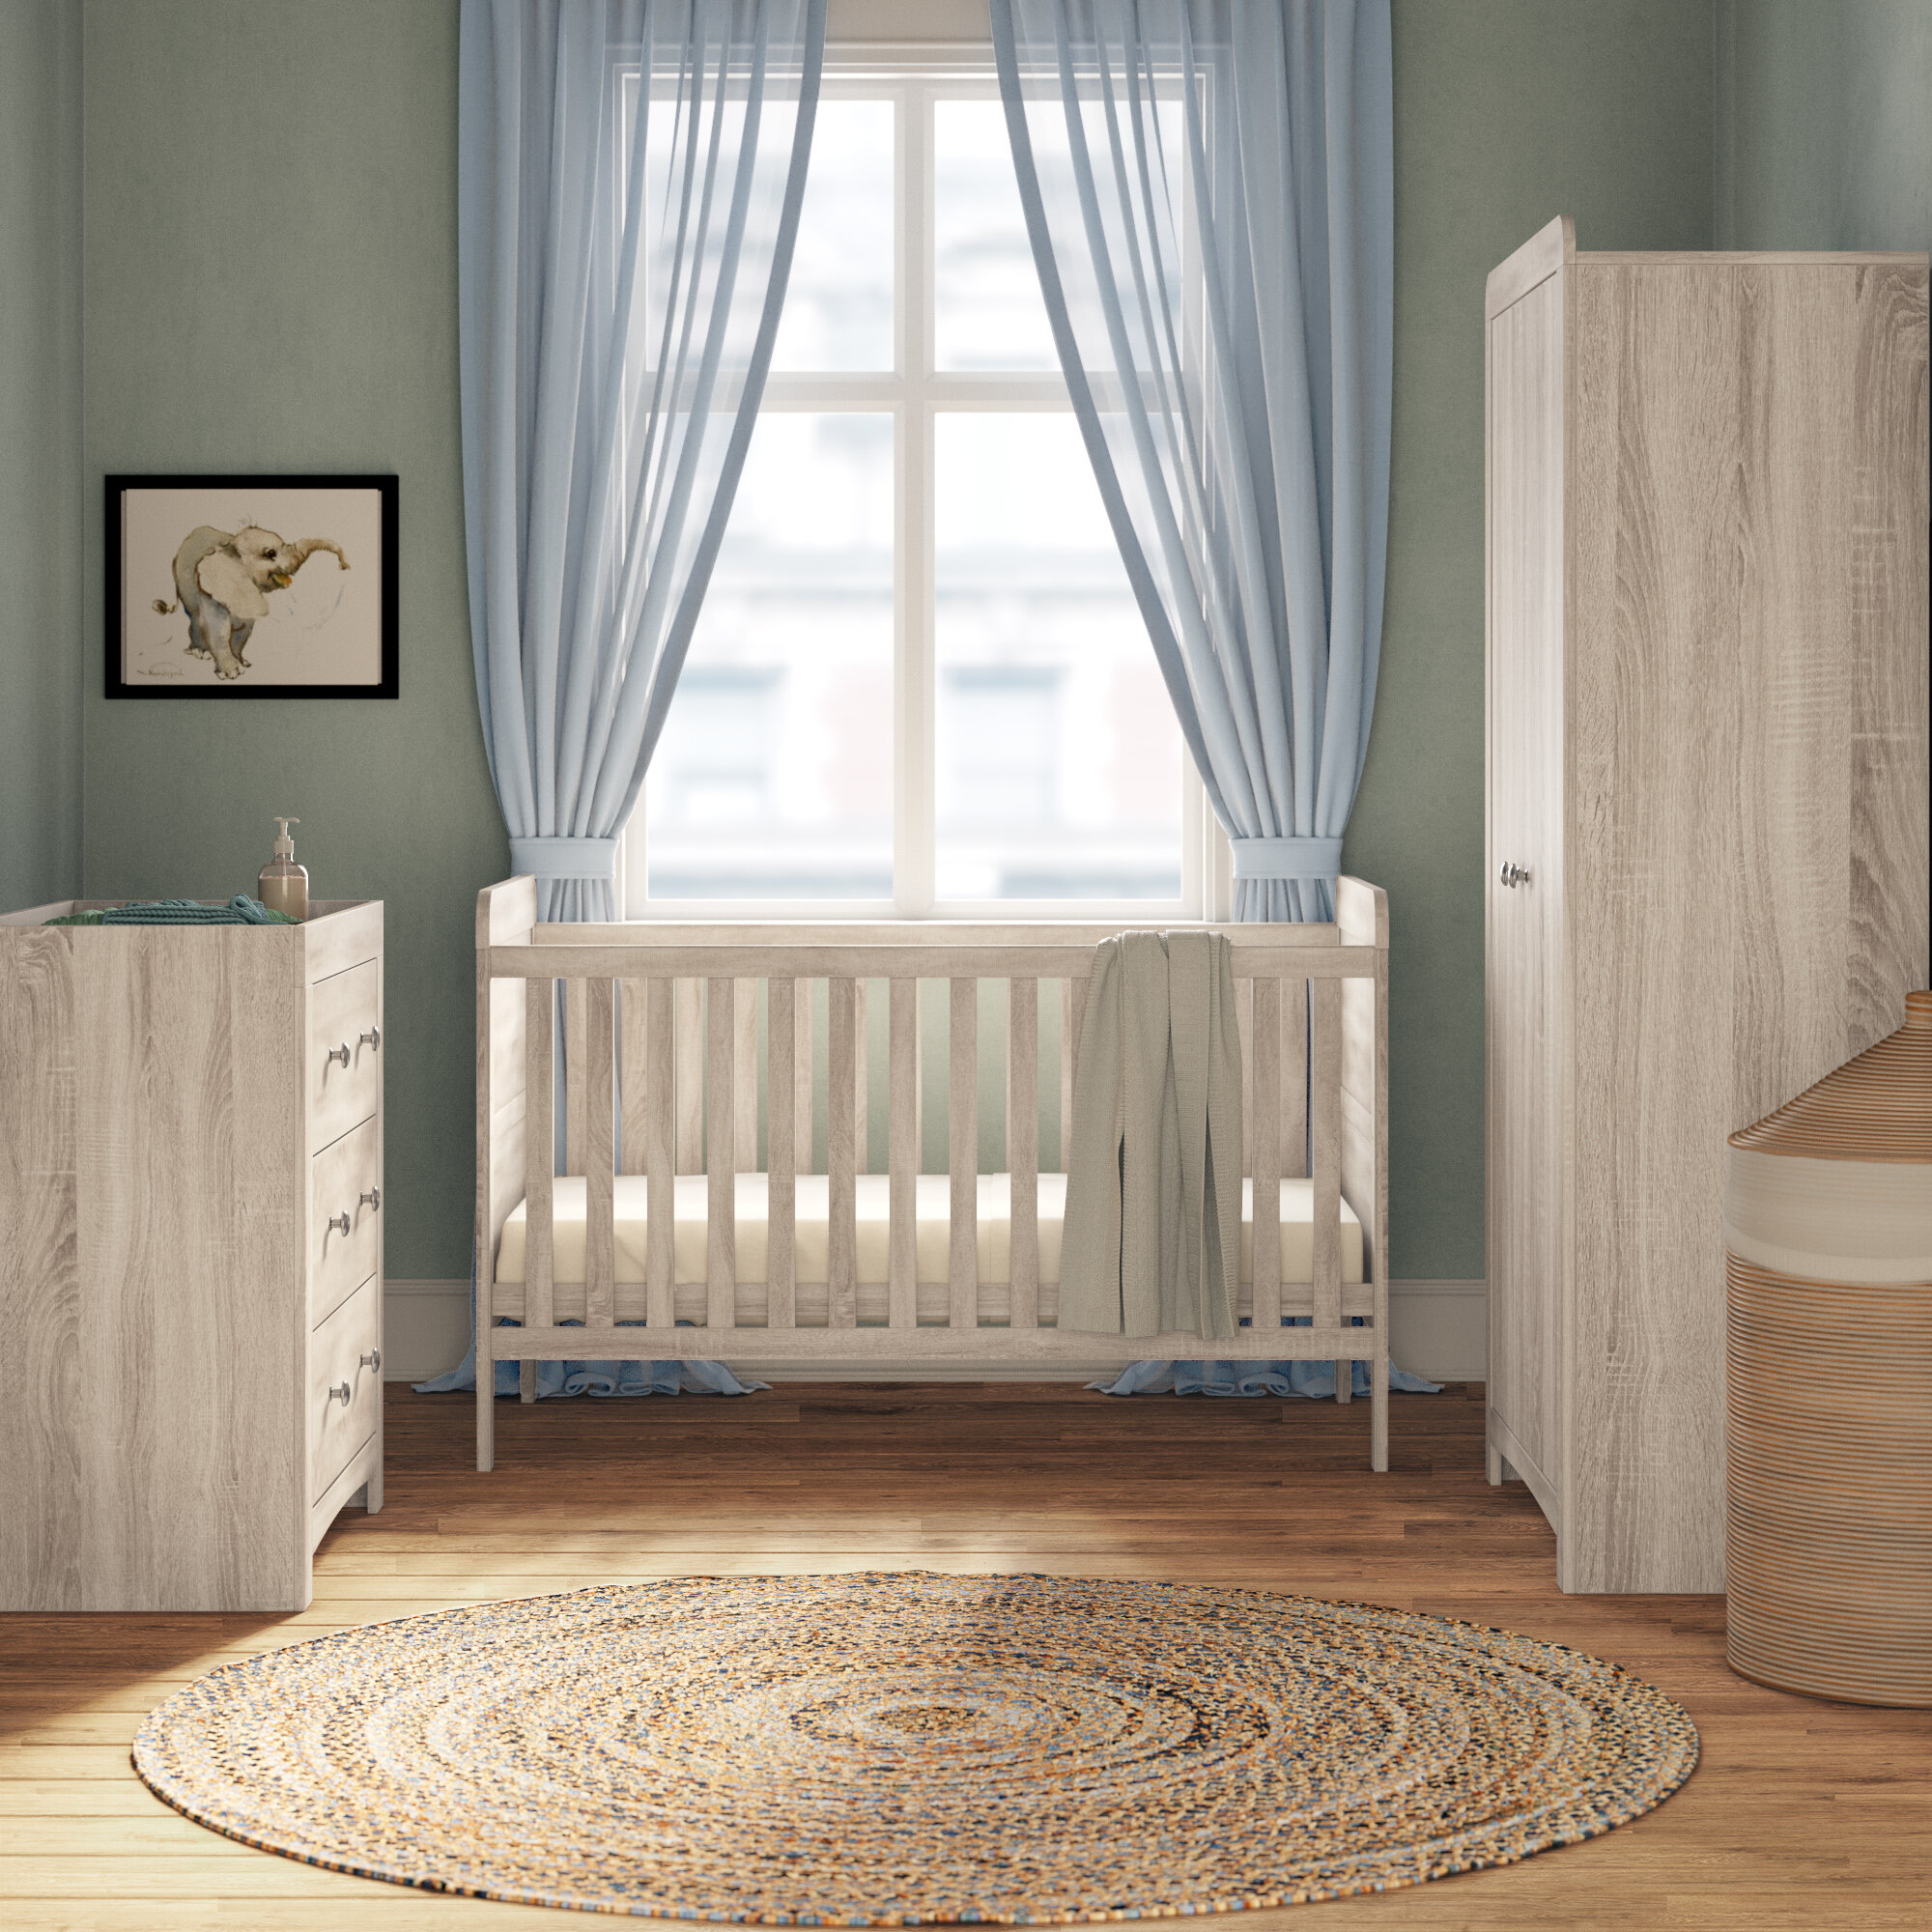 Isabelle Max Mia Cot Bed 3 Piece Nursery Furniture Set Reviews